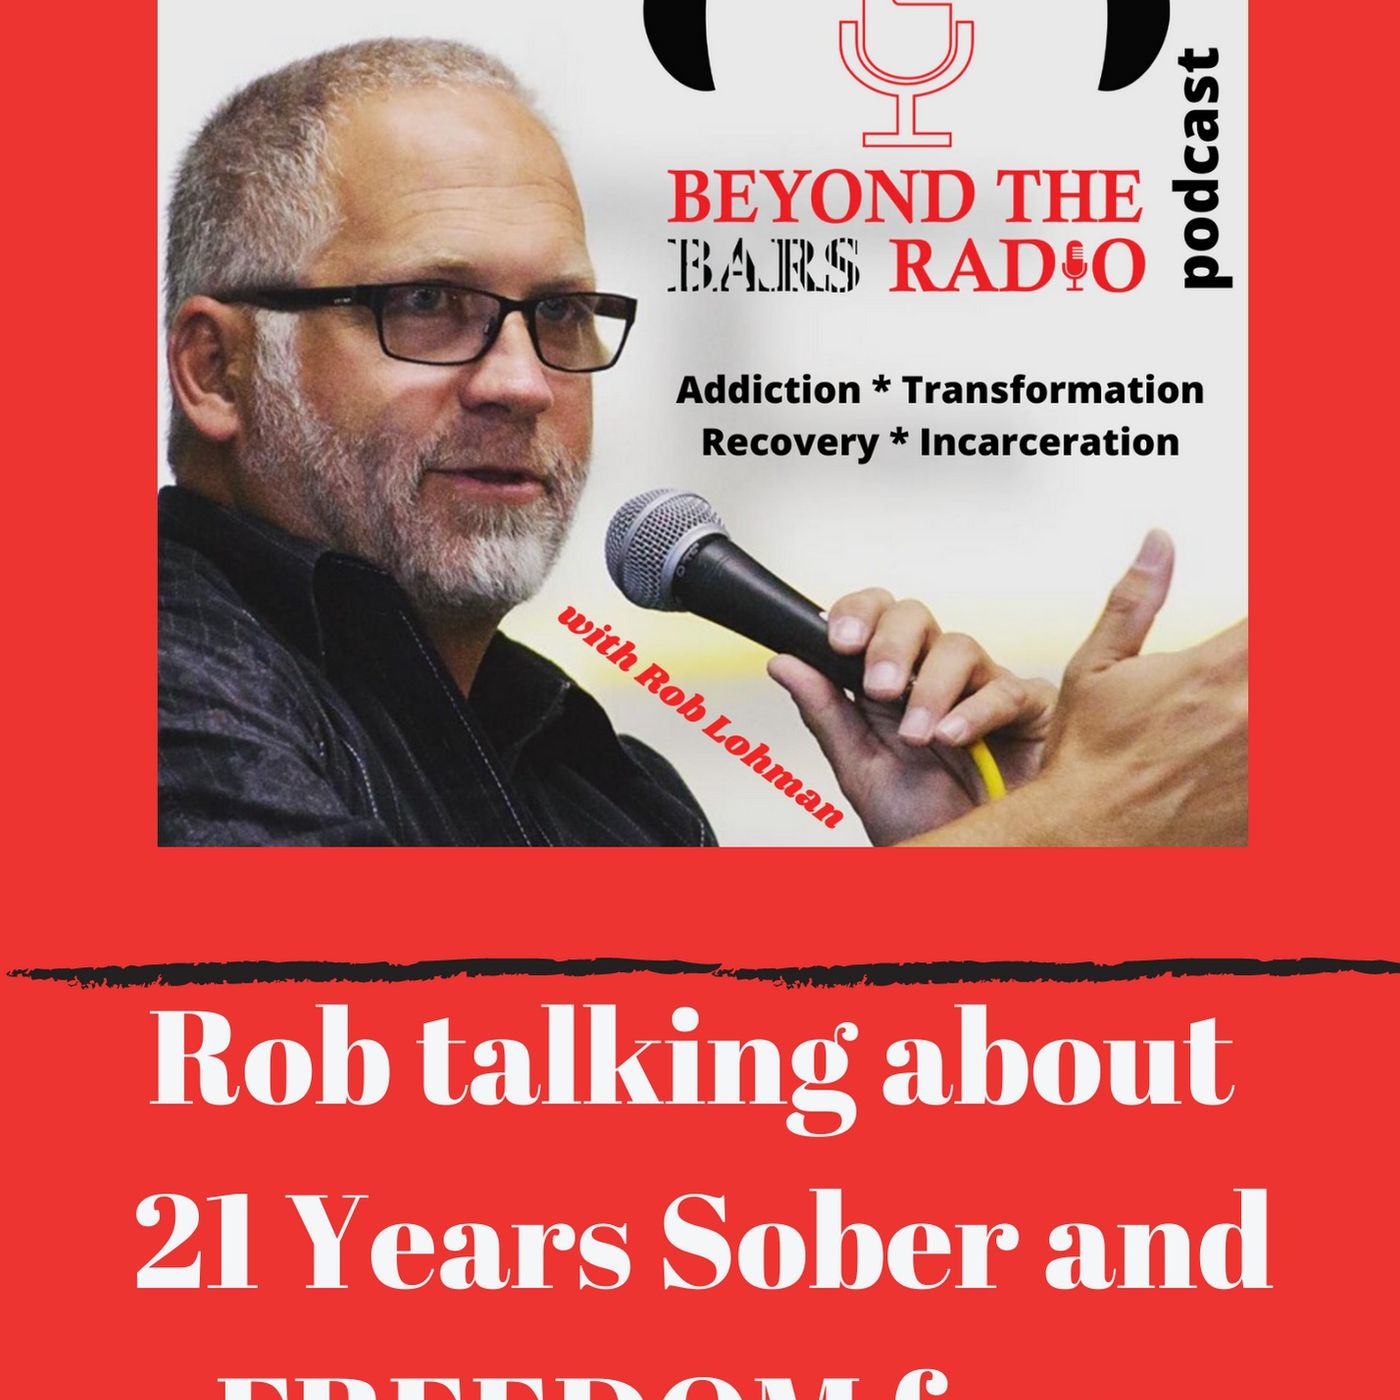 Celebrating 21 Years Sober and Lessons Learned with Rob Lohman